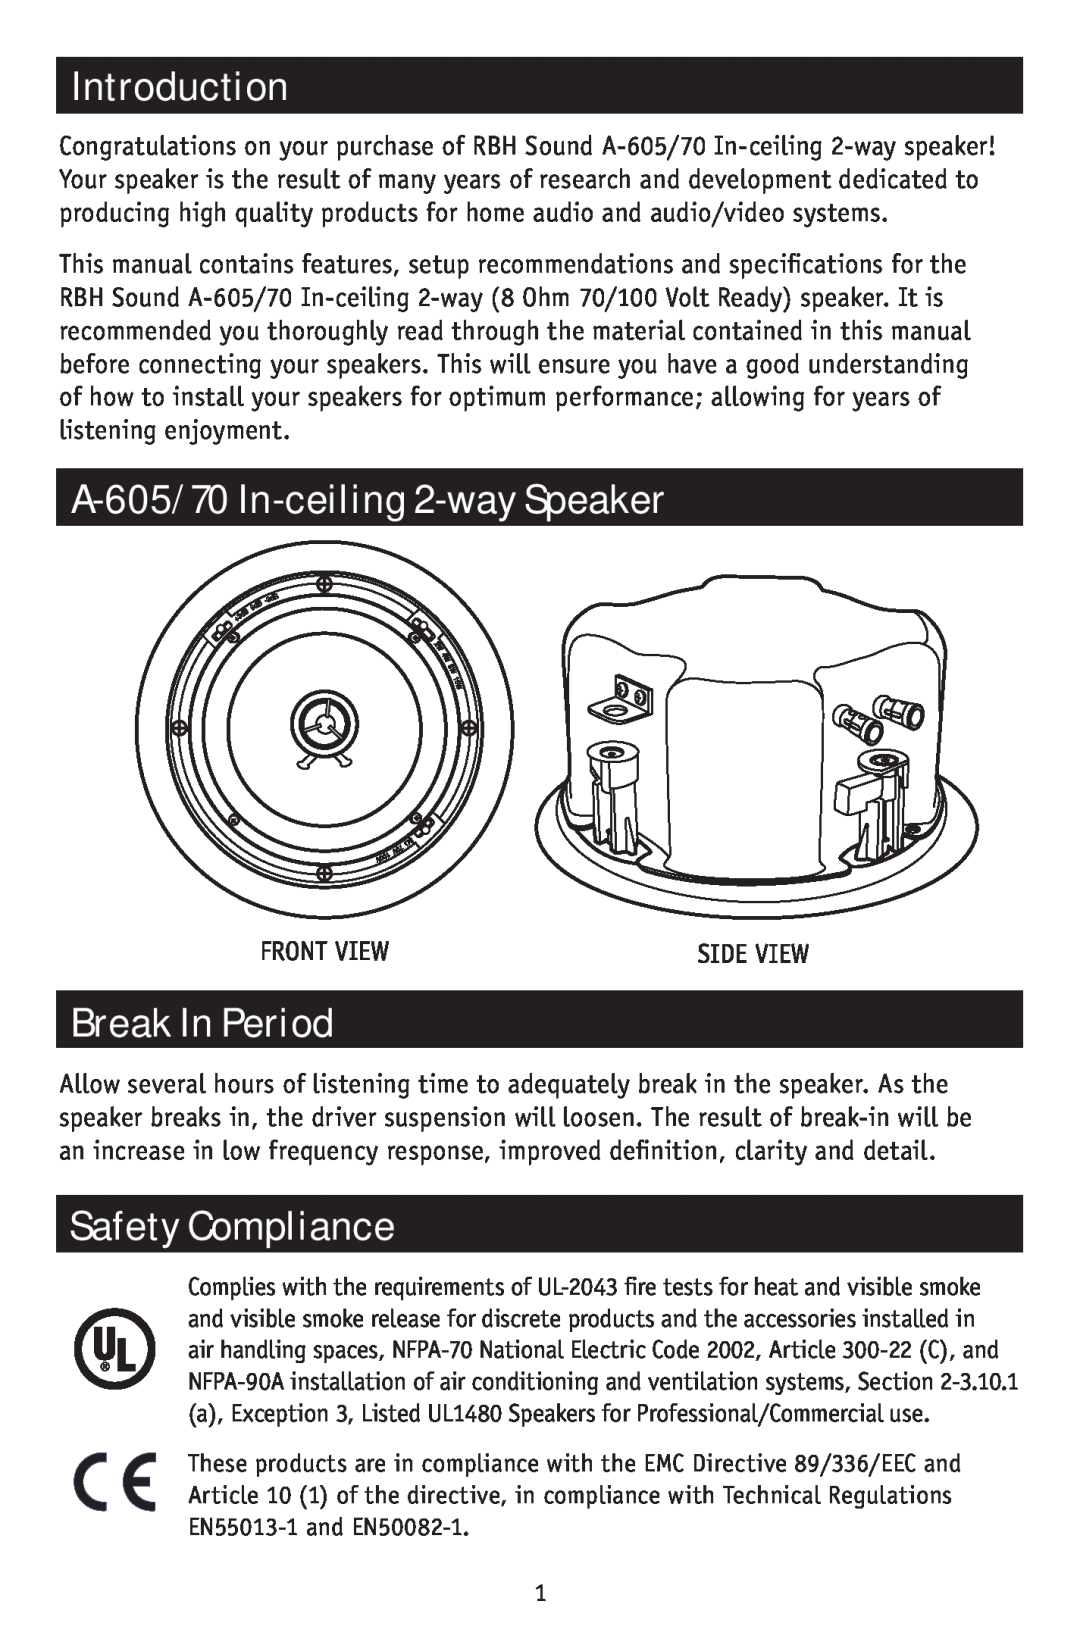 RBH Sound owner manual Introduction, A-605/70 In-ceiling 2-waySpeaker Break In Period, Safety Compliance 